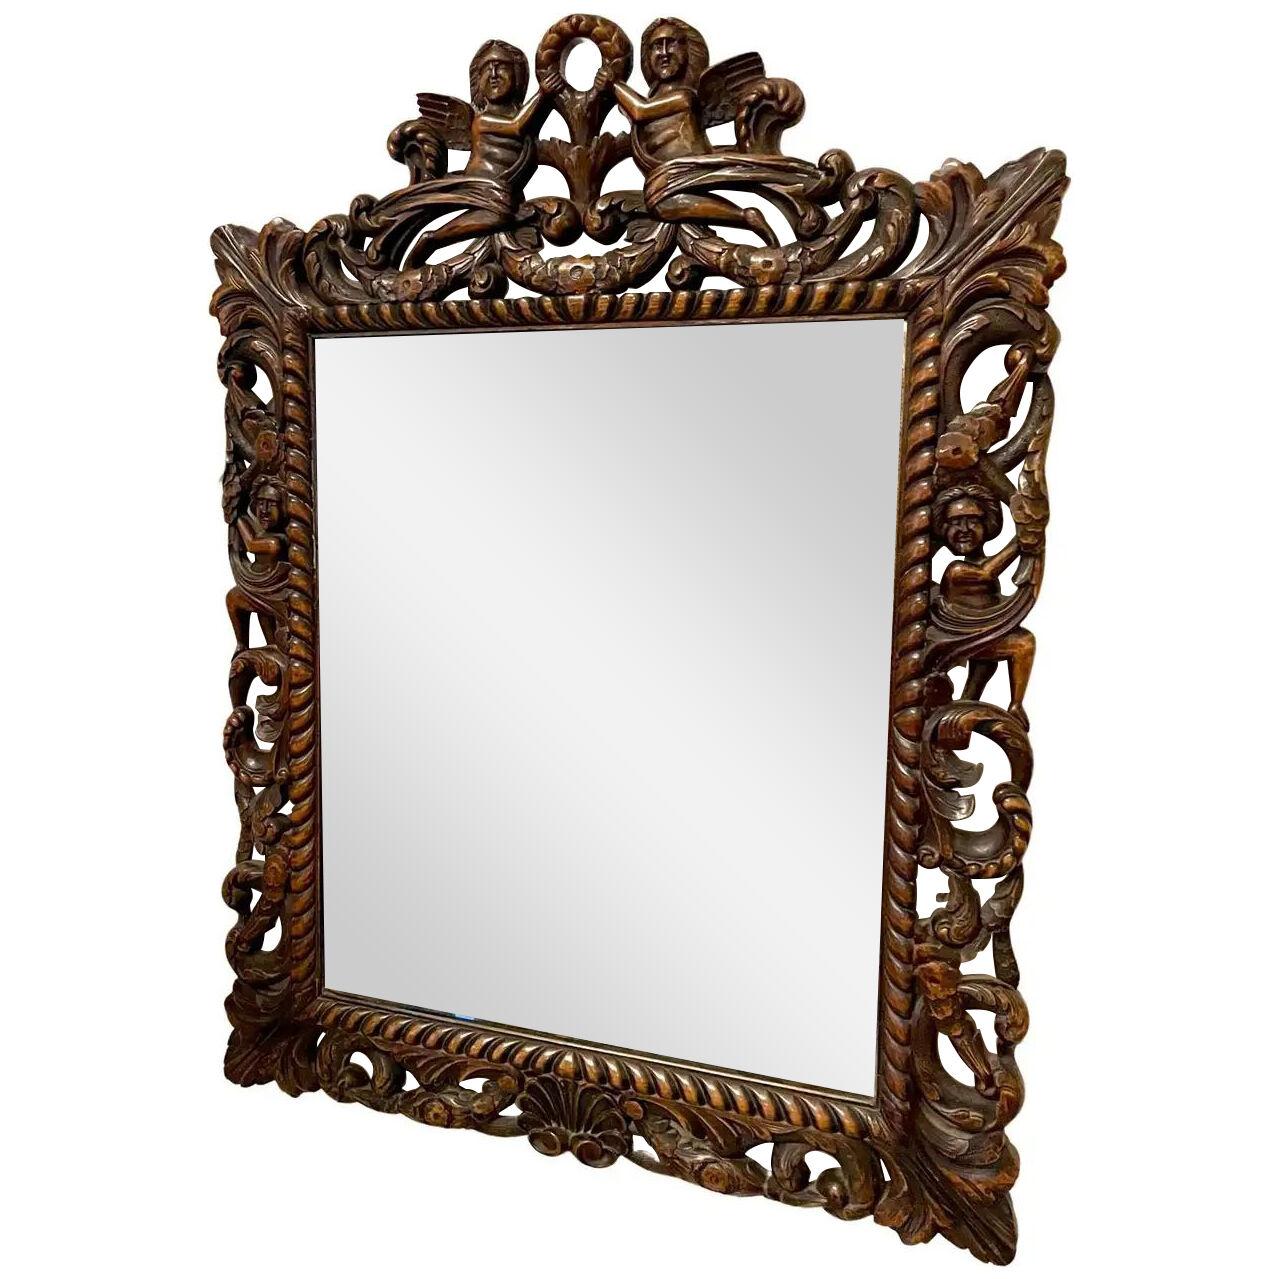 Outstanding Quality Carved Walnut Wall Mirror